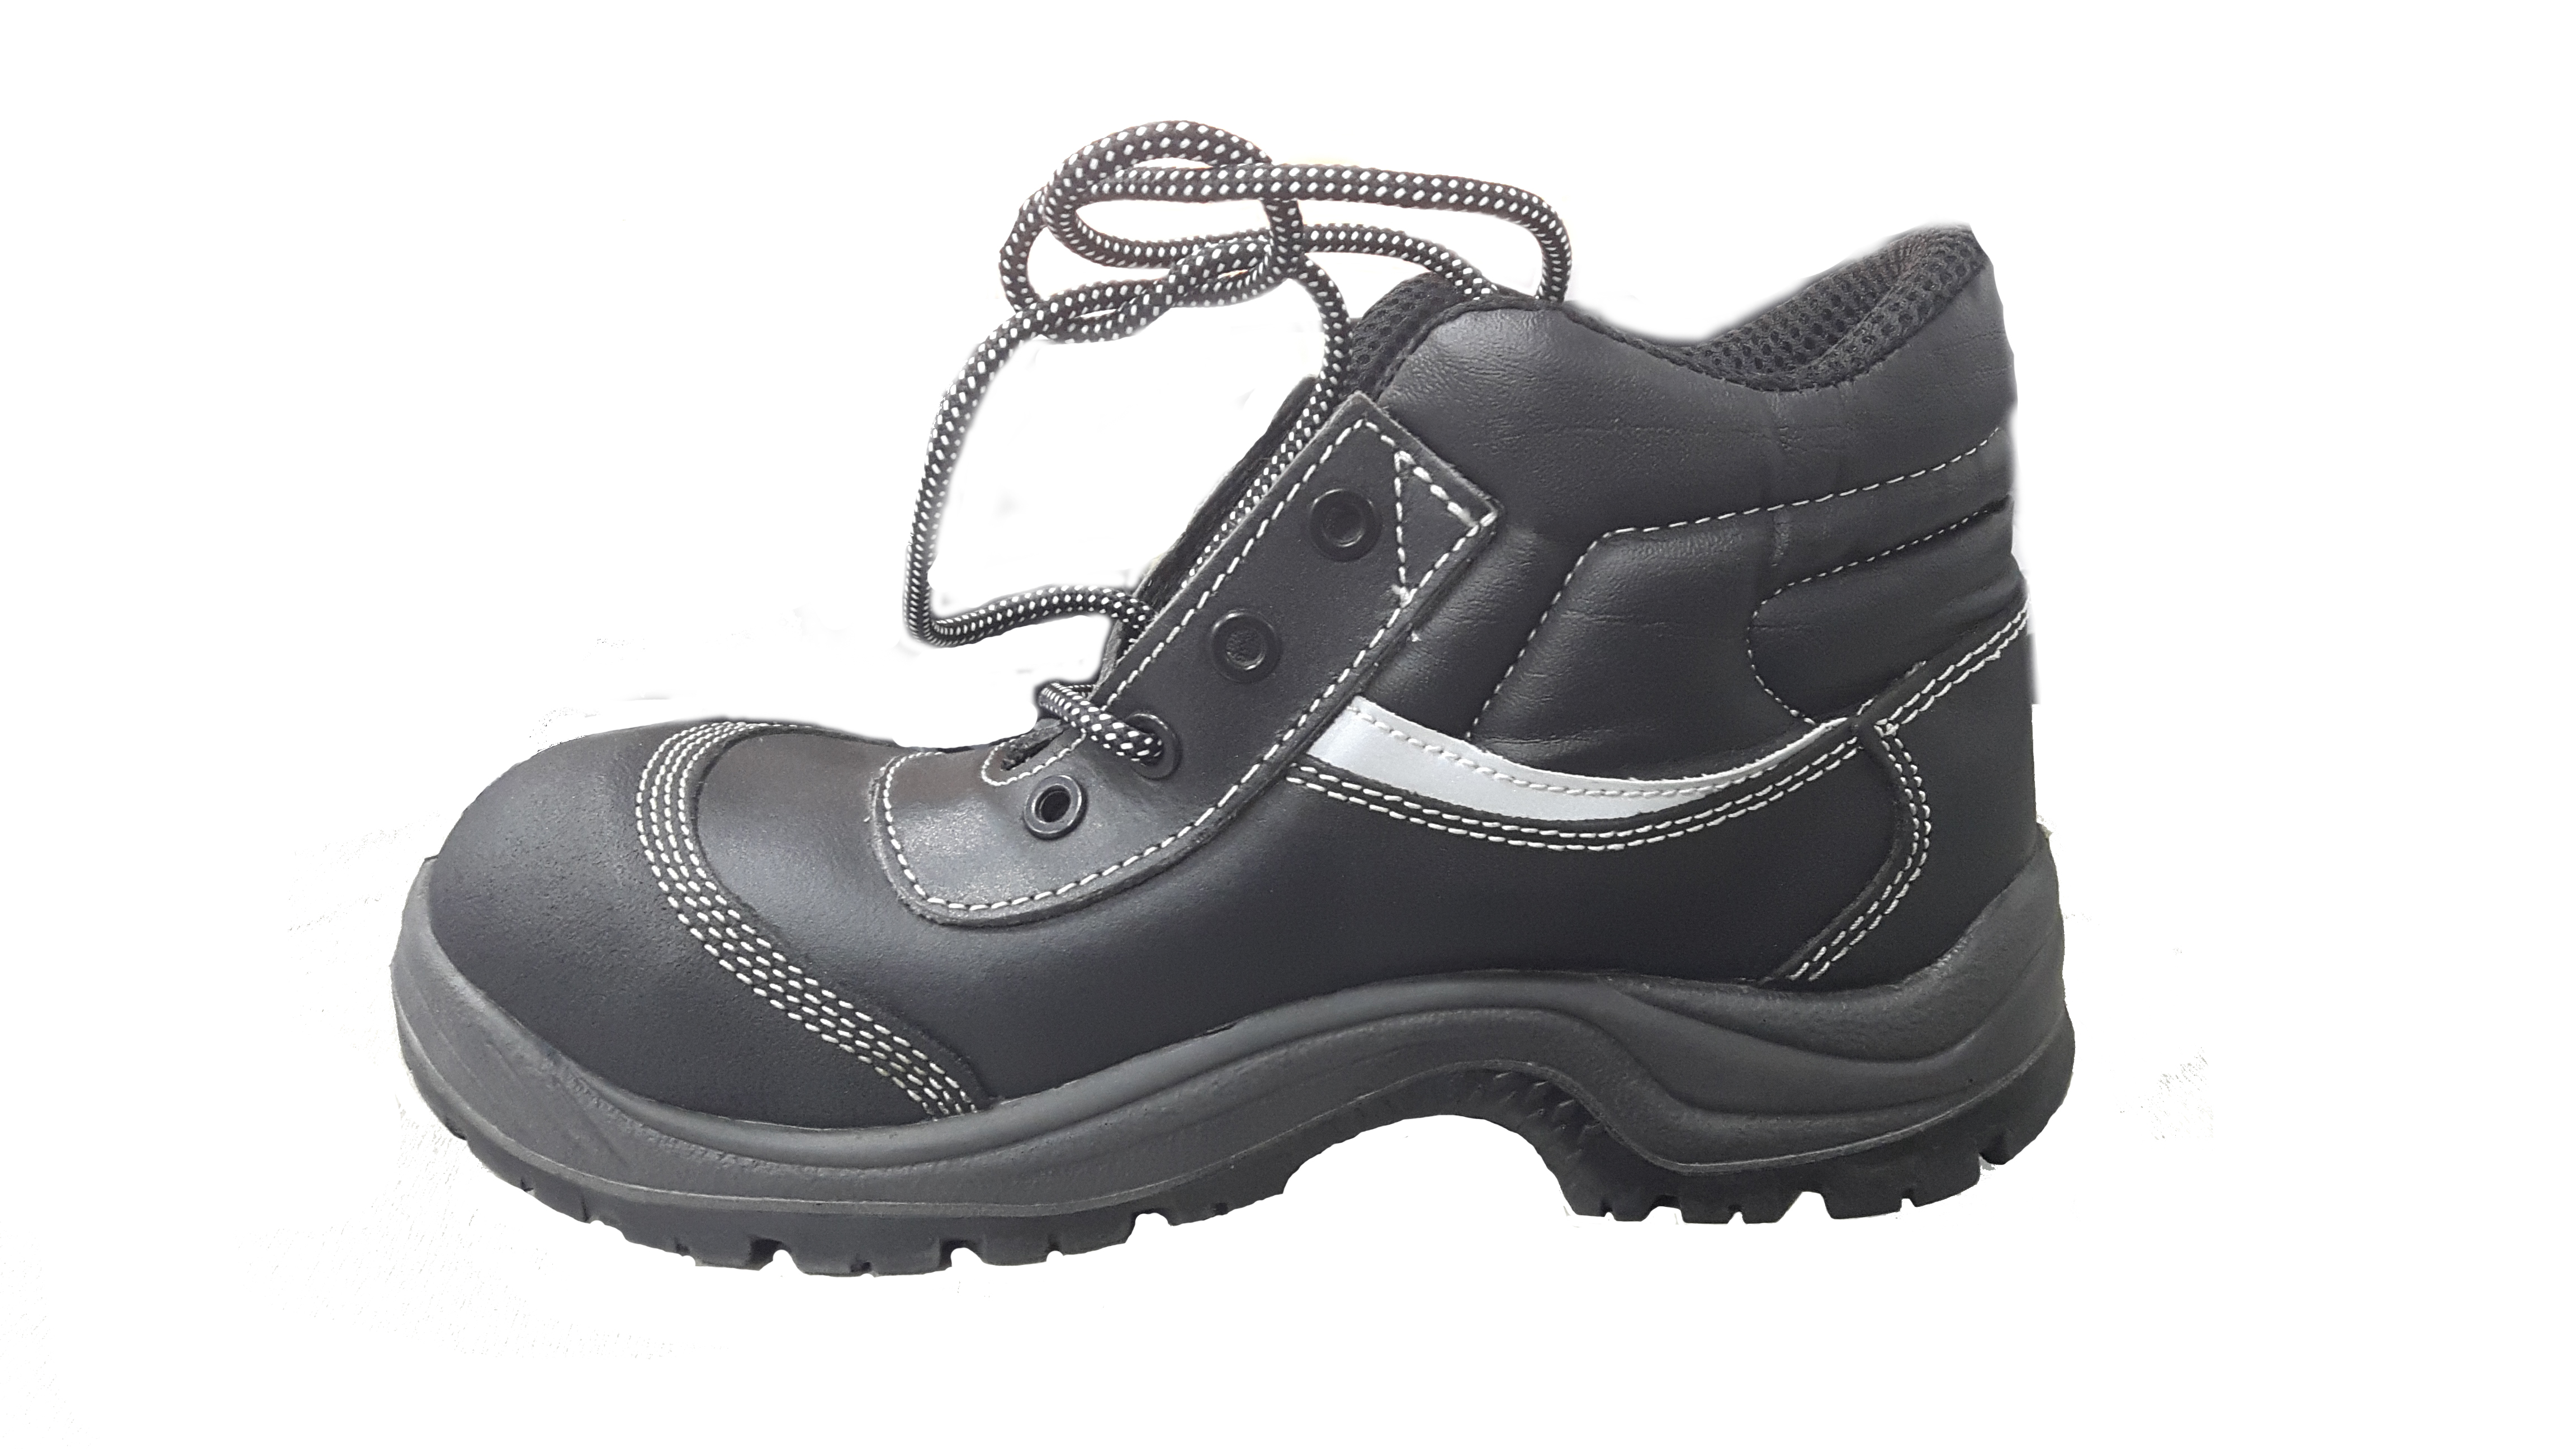  Manager`s Safety Shoe Bull- Safety Shoe, Leather shoe, Black Safety shoe - Shock absorption working safety wear